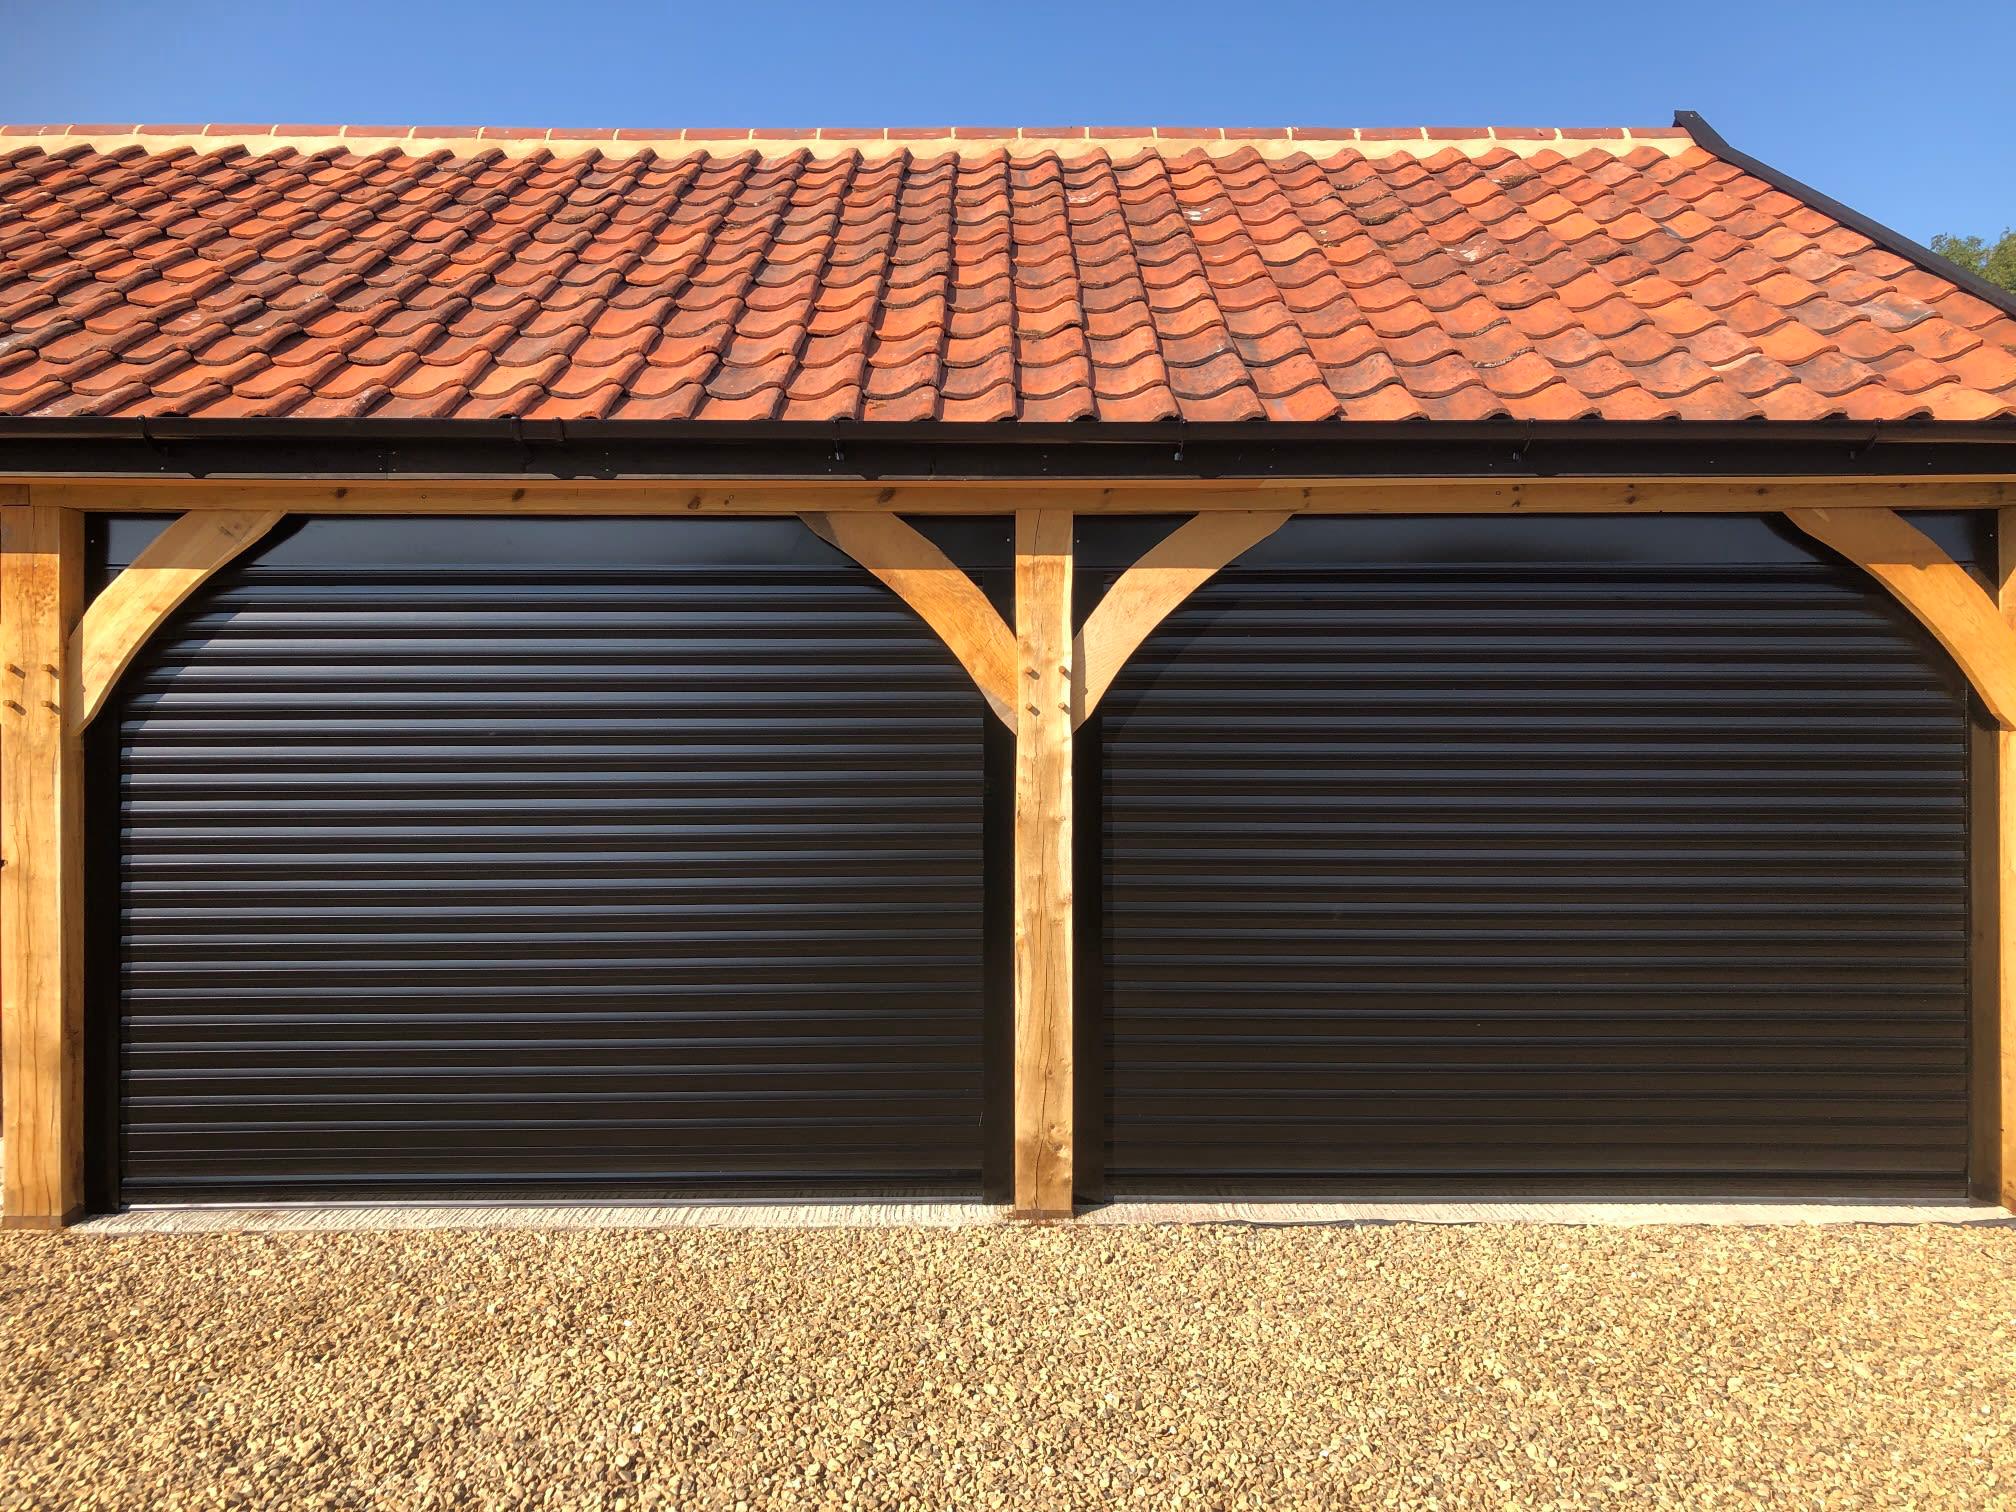 Images East Anglia Roller Shutters